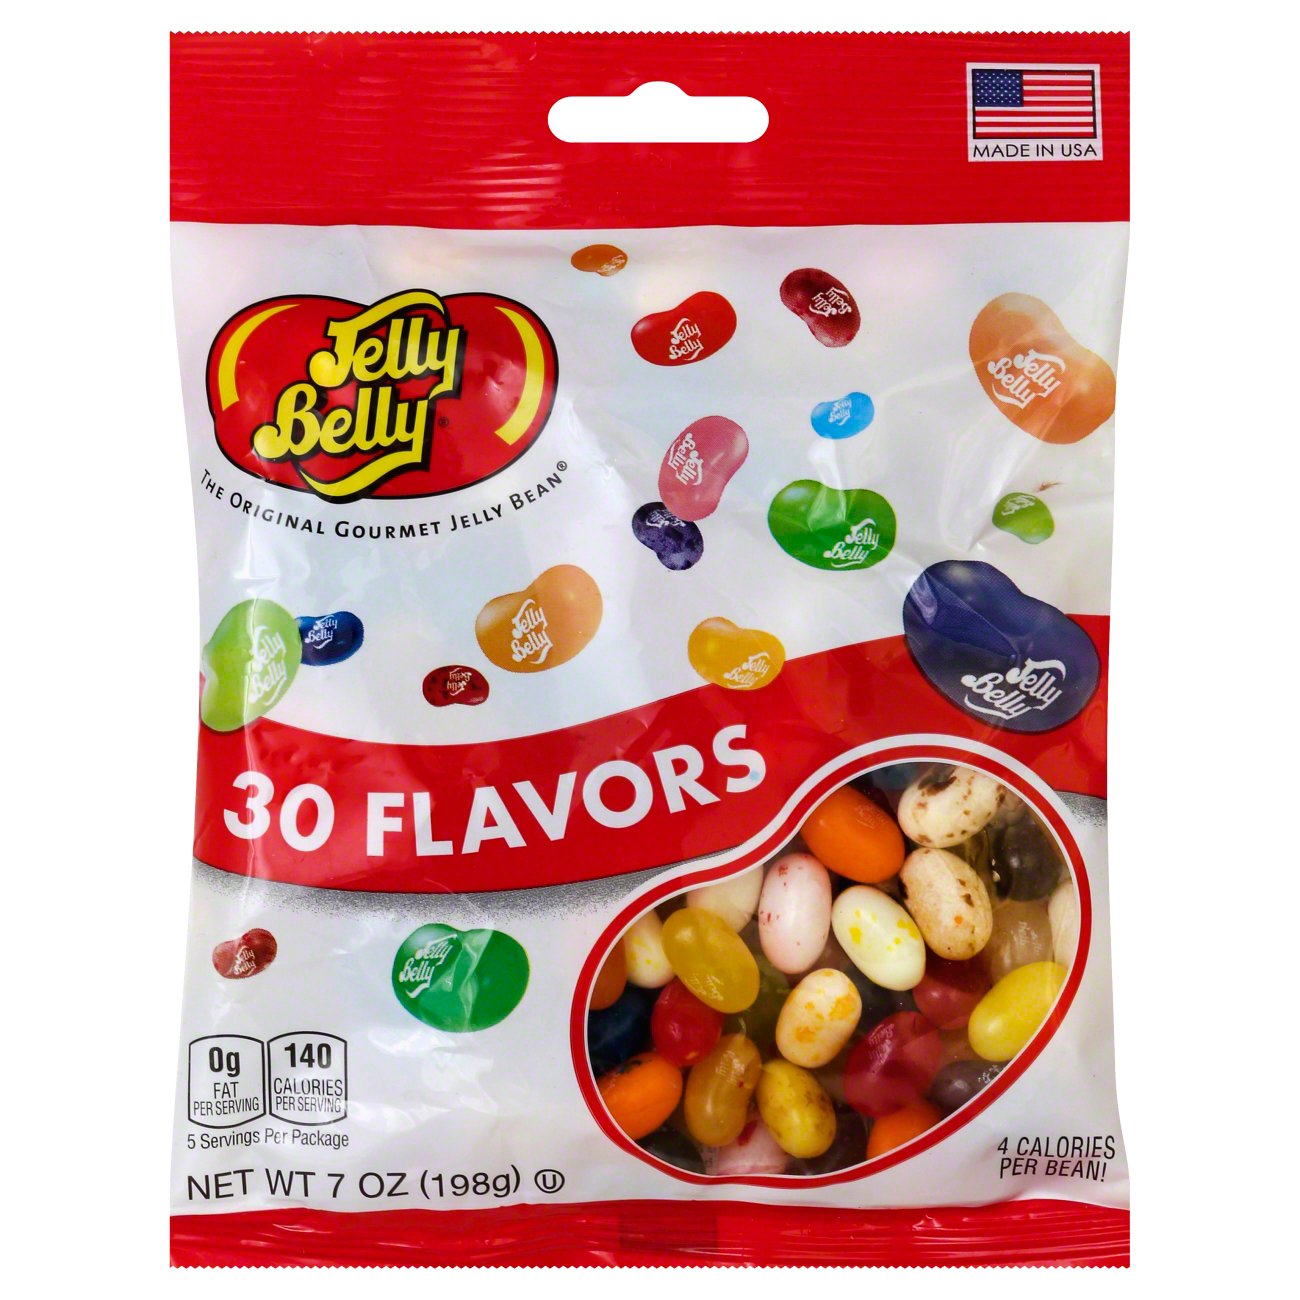 Jelly Belly 30 Flavor Original Gourmet Jelly Beans - Shop Candy at H-E-B